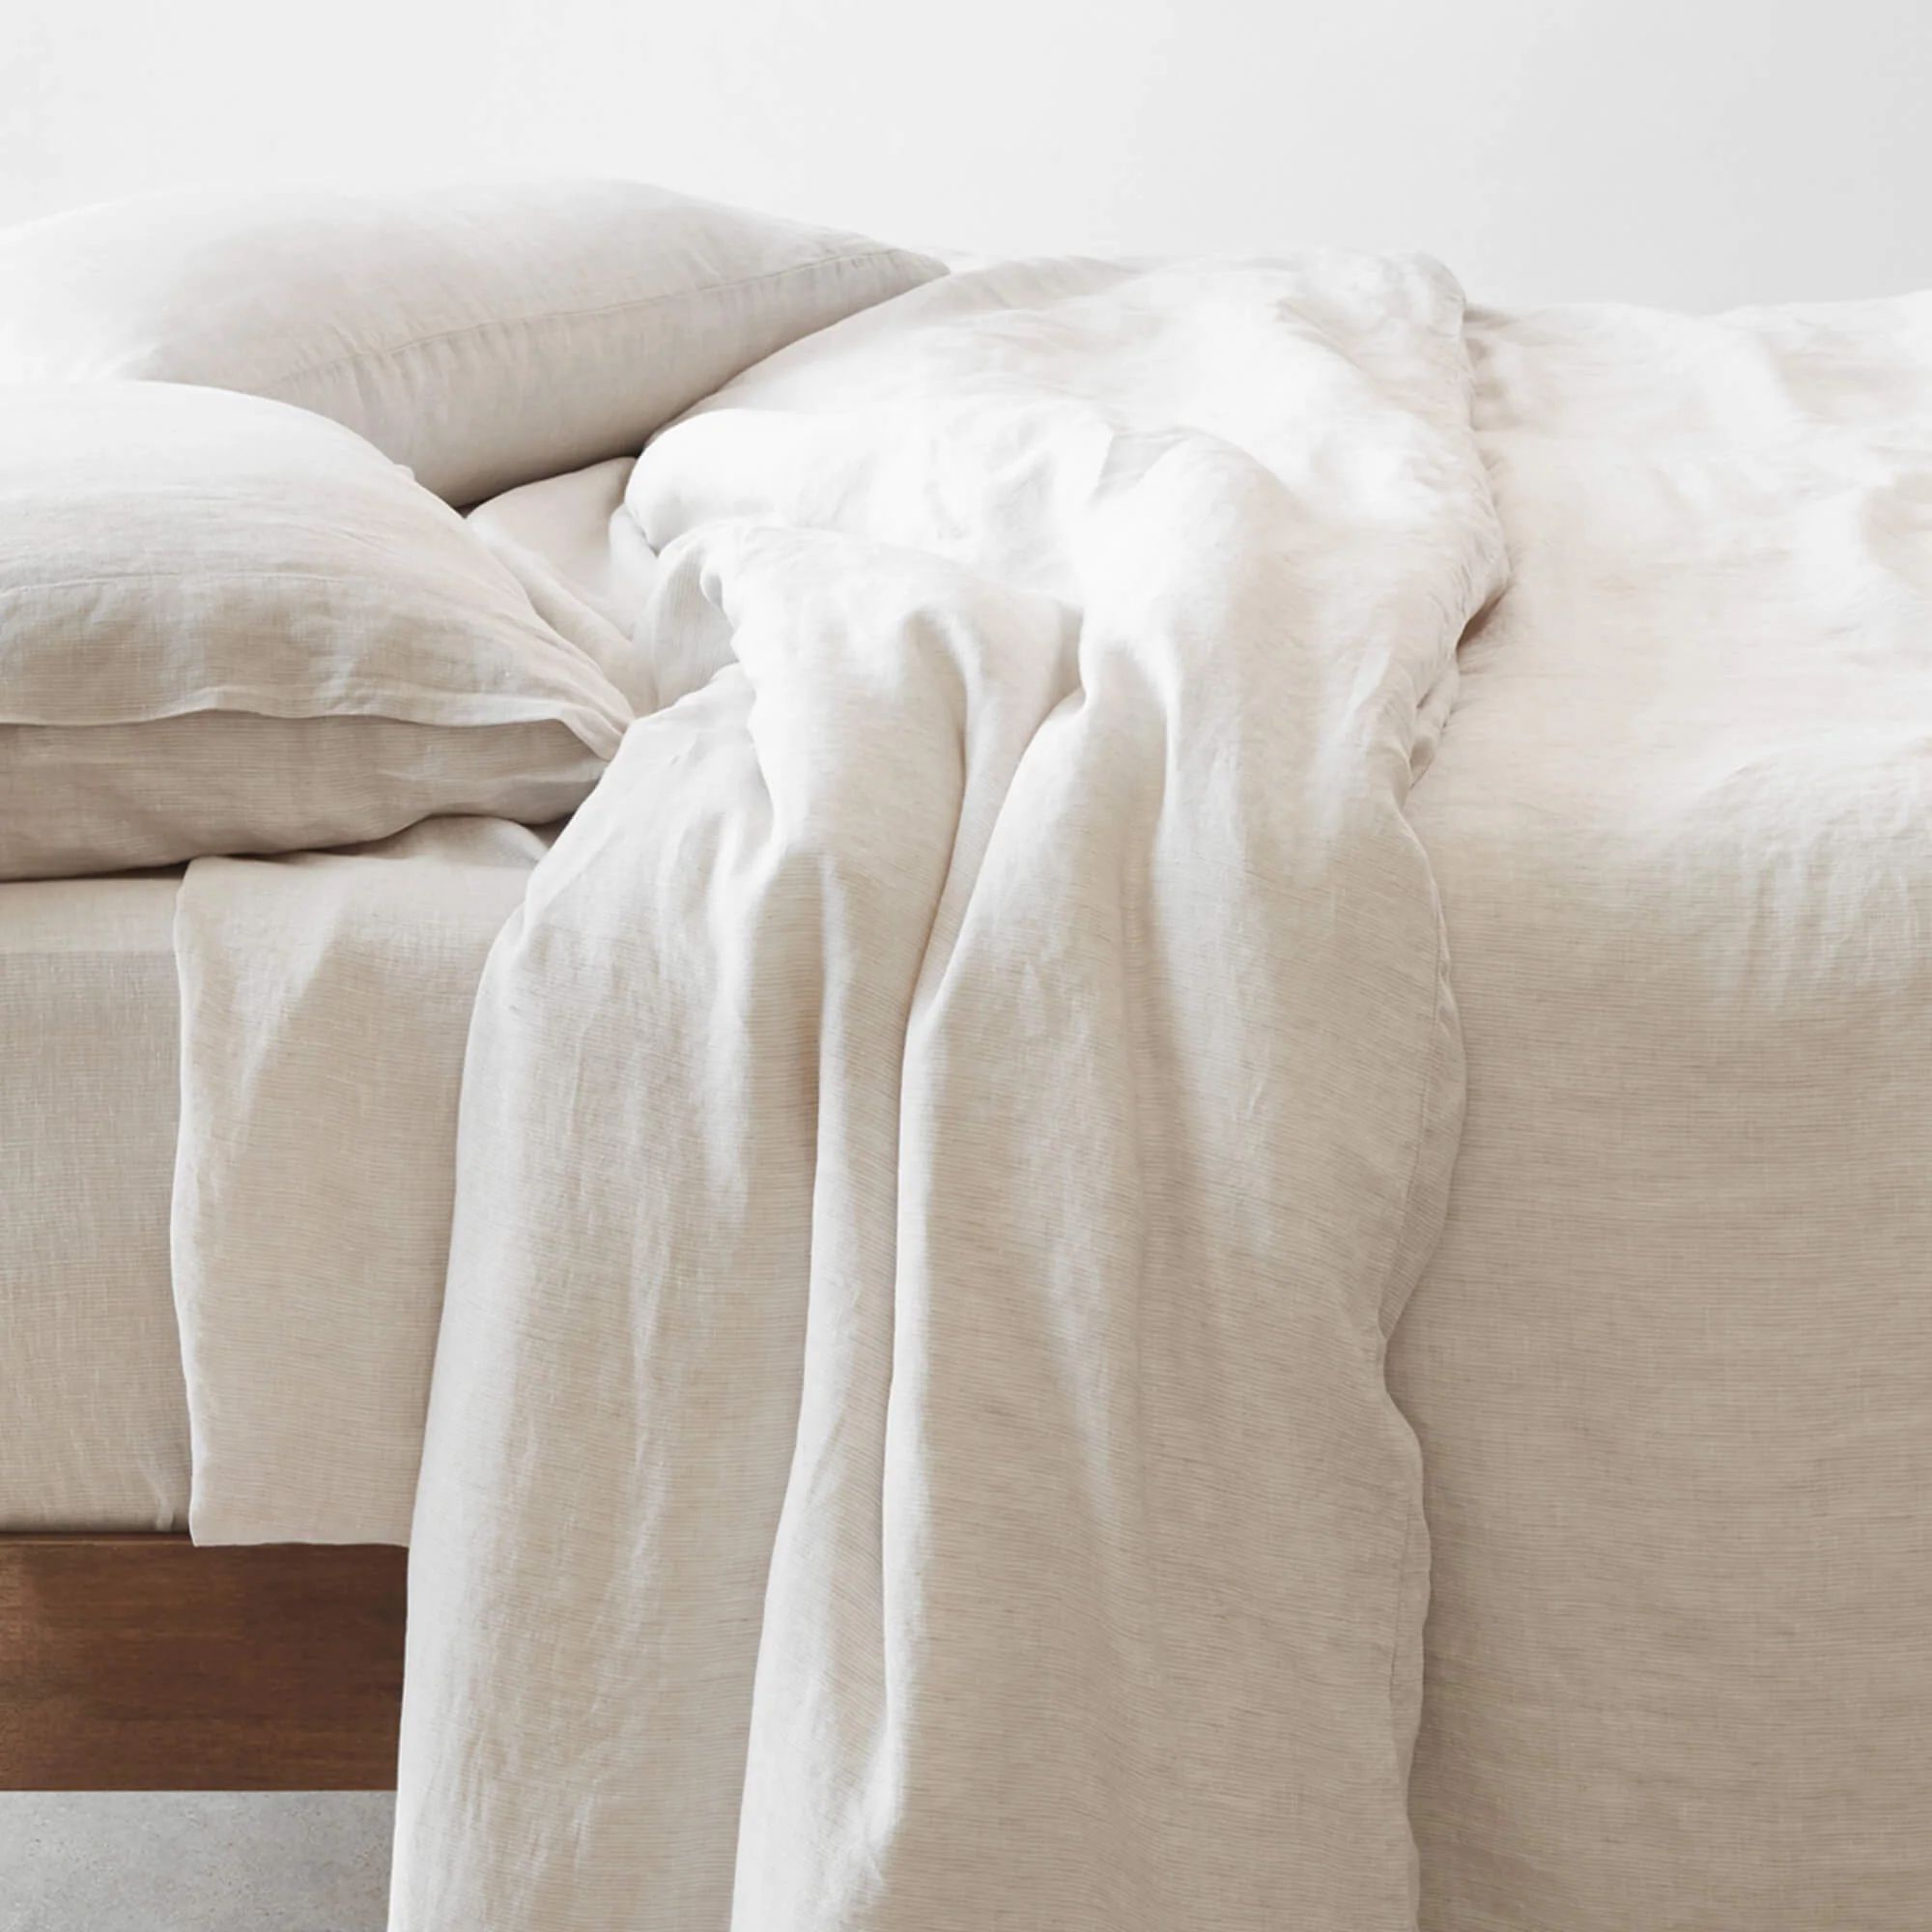 Stonewashed Linen Duvet Covers | Available in 8 Colors   – The Citizenry | The Citizenry